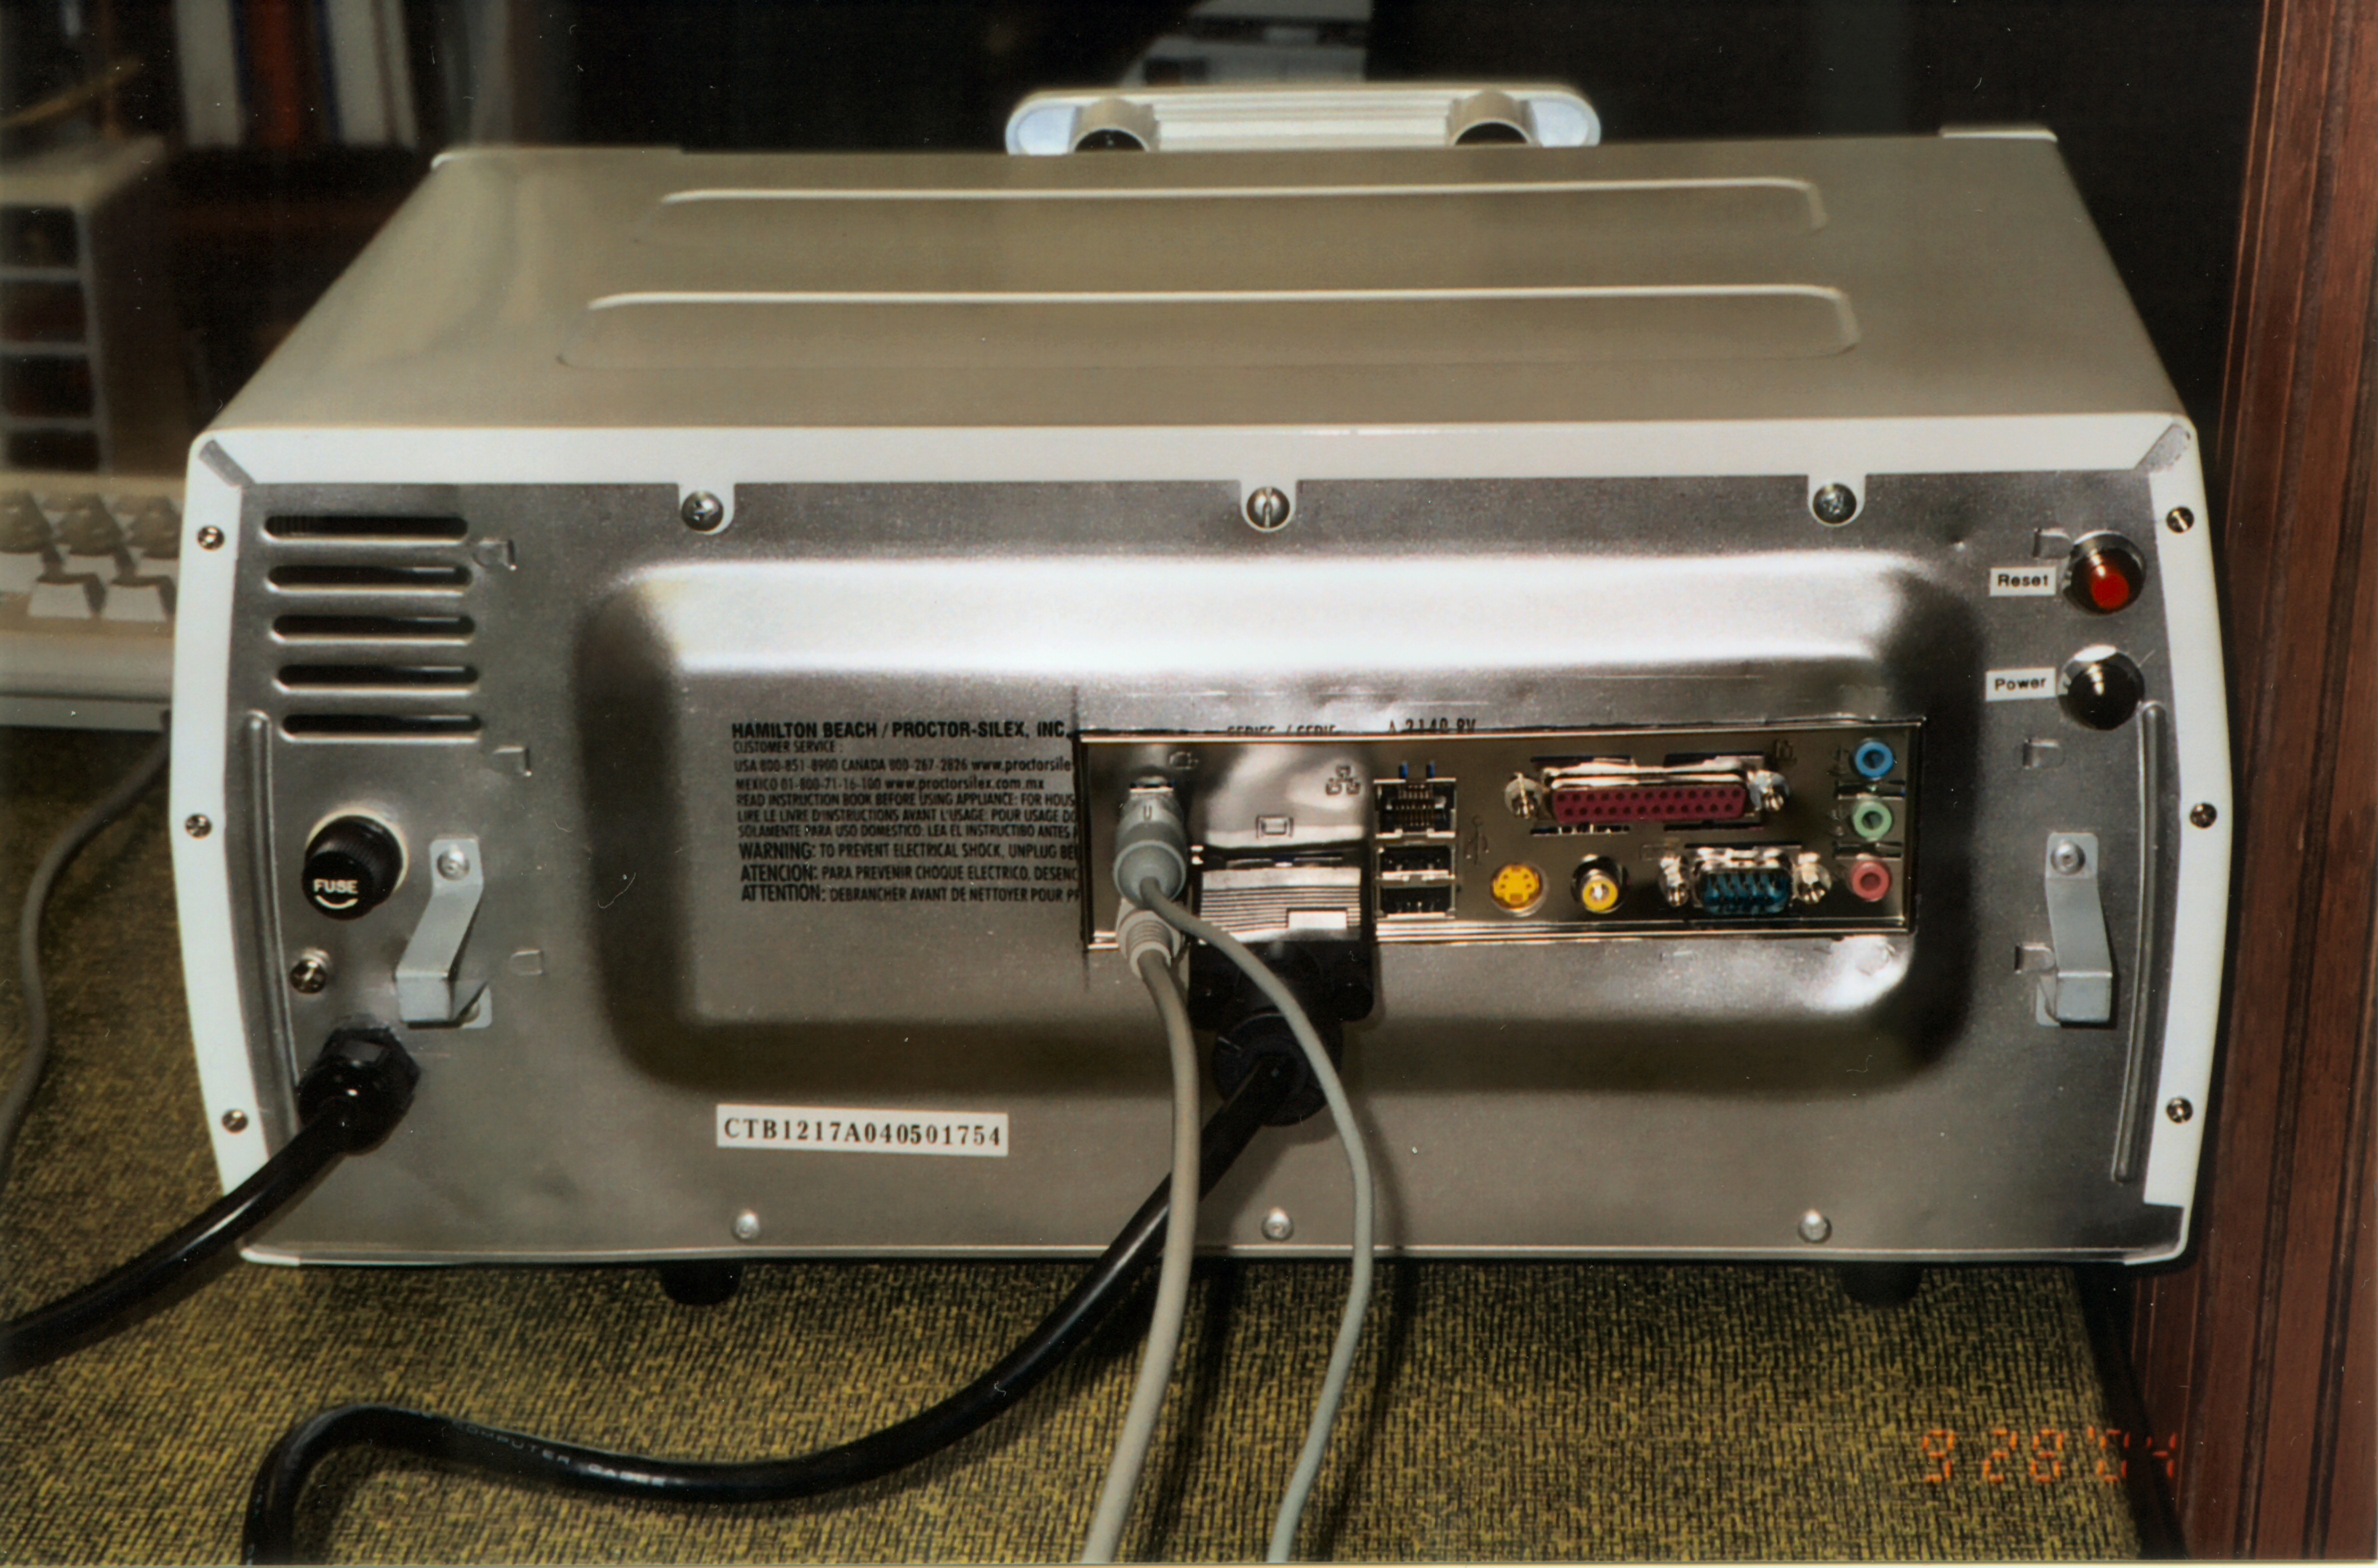 Rear view of the computer.